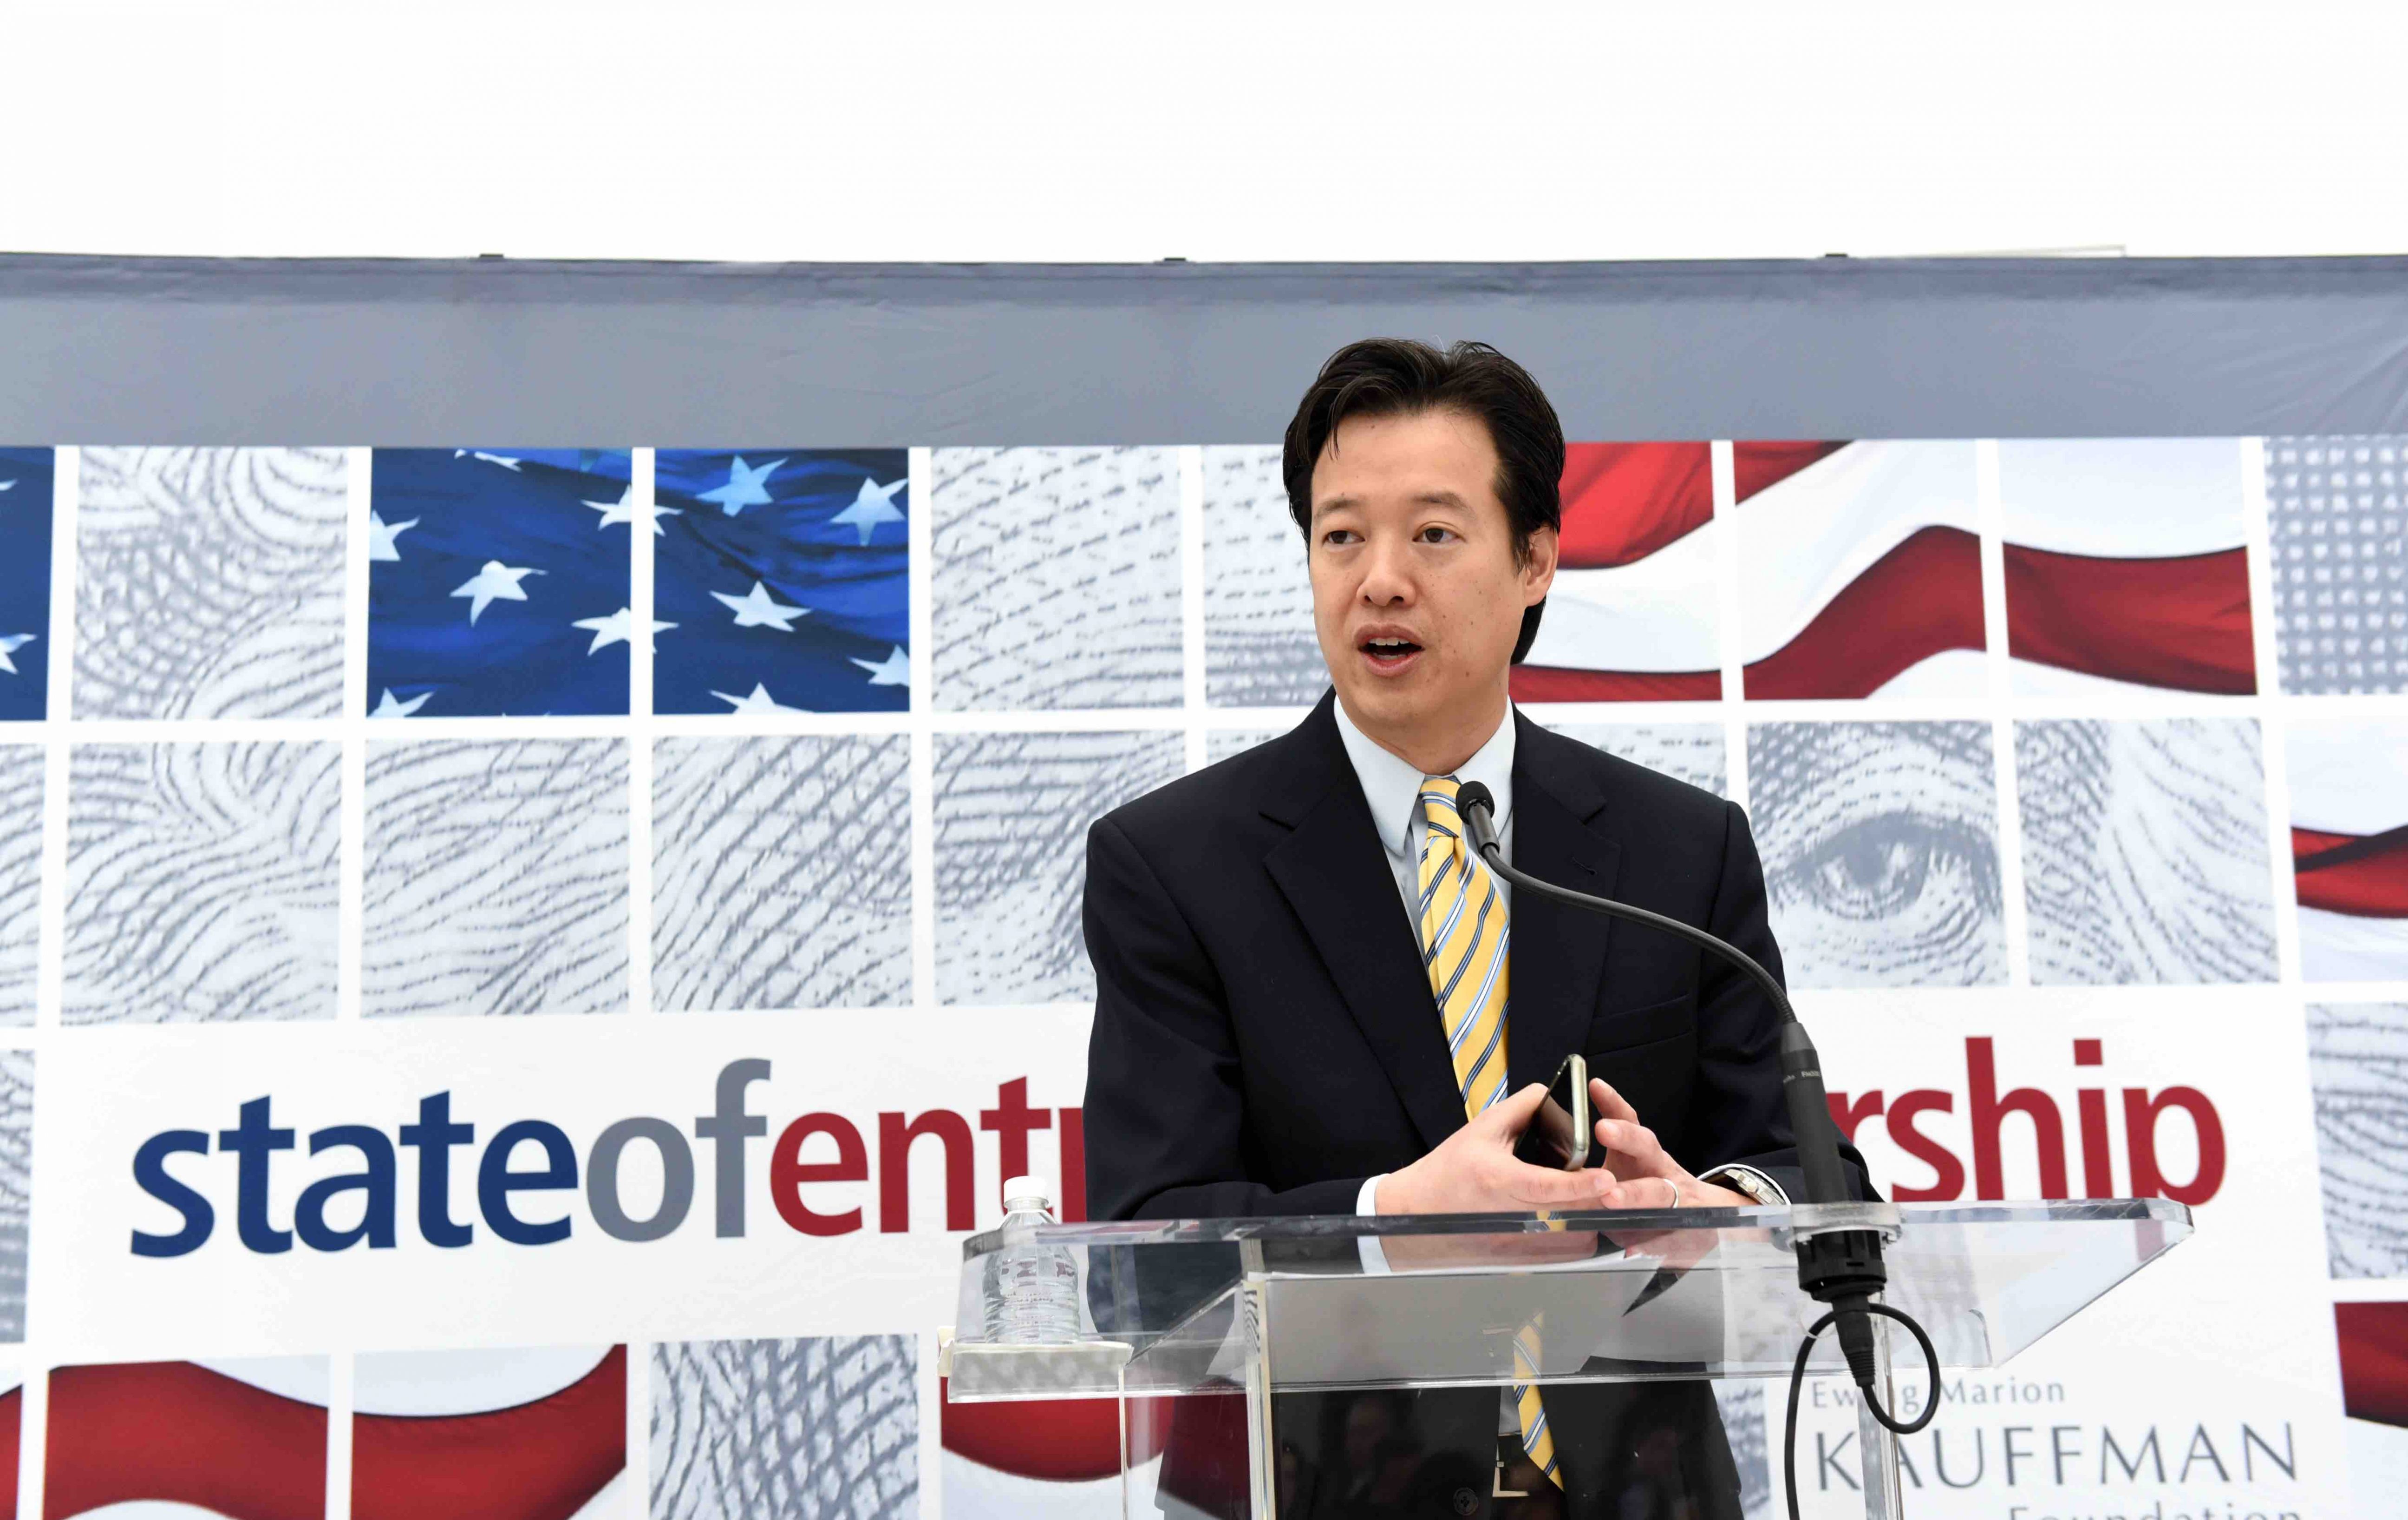 In address to Congress, Victor Hwang urges action on entrepreneurship deficit